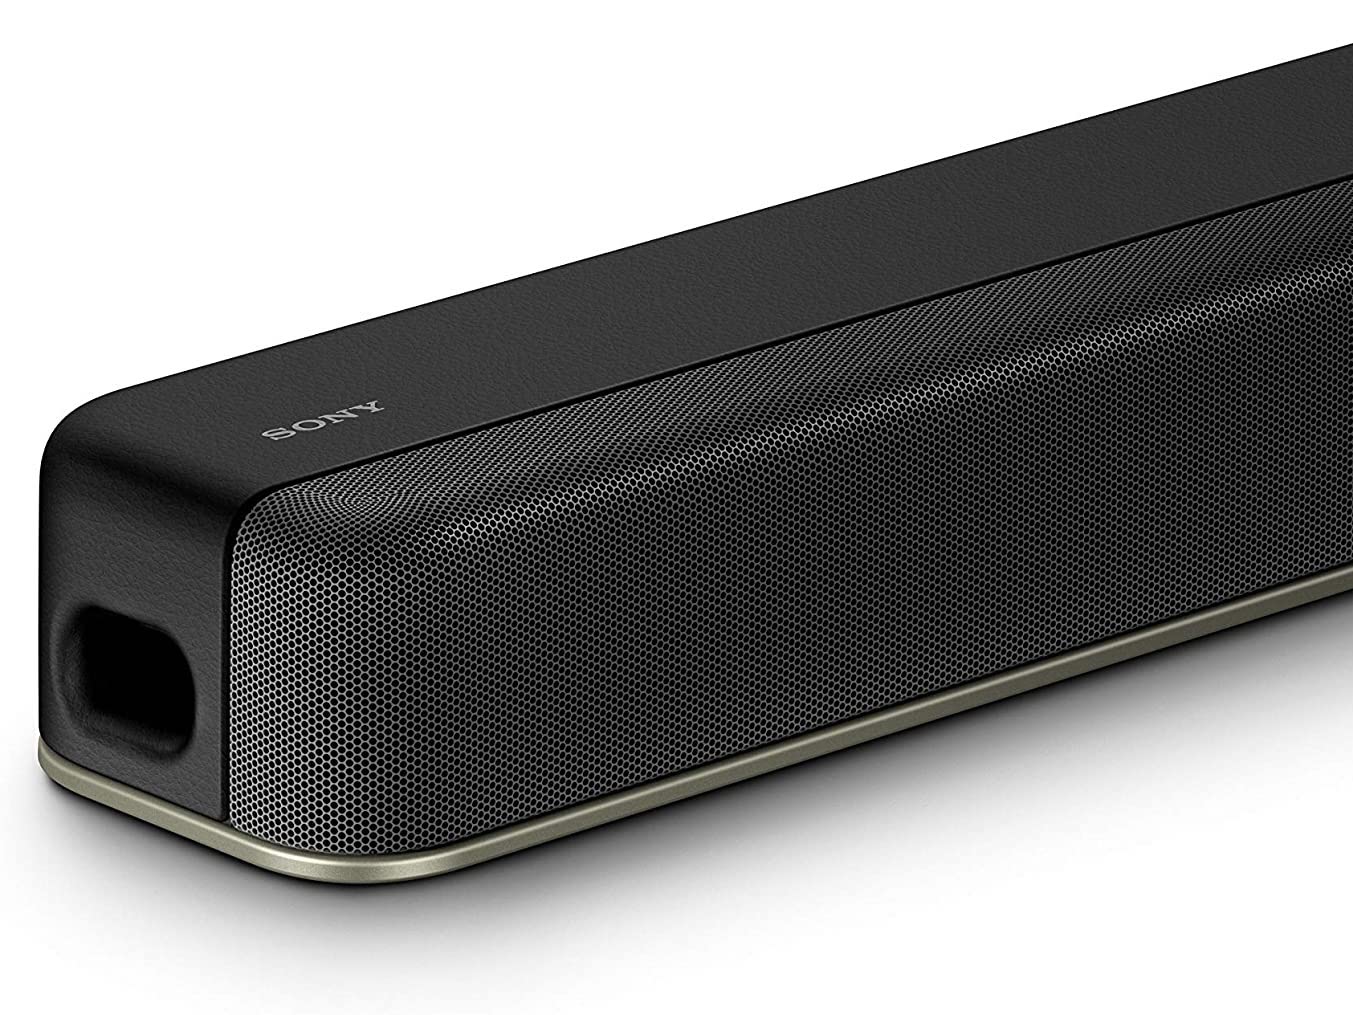 Sony HT-X8500 soundbar with Dolby Atmos 4K passthrough now sale with a 40% discount - NotebookCheck.net News